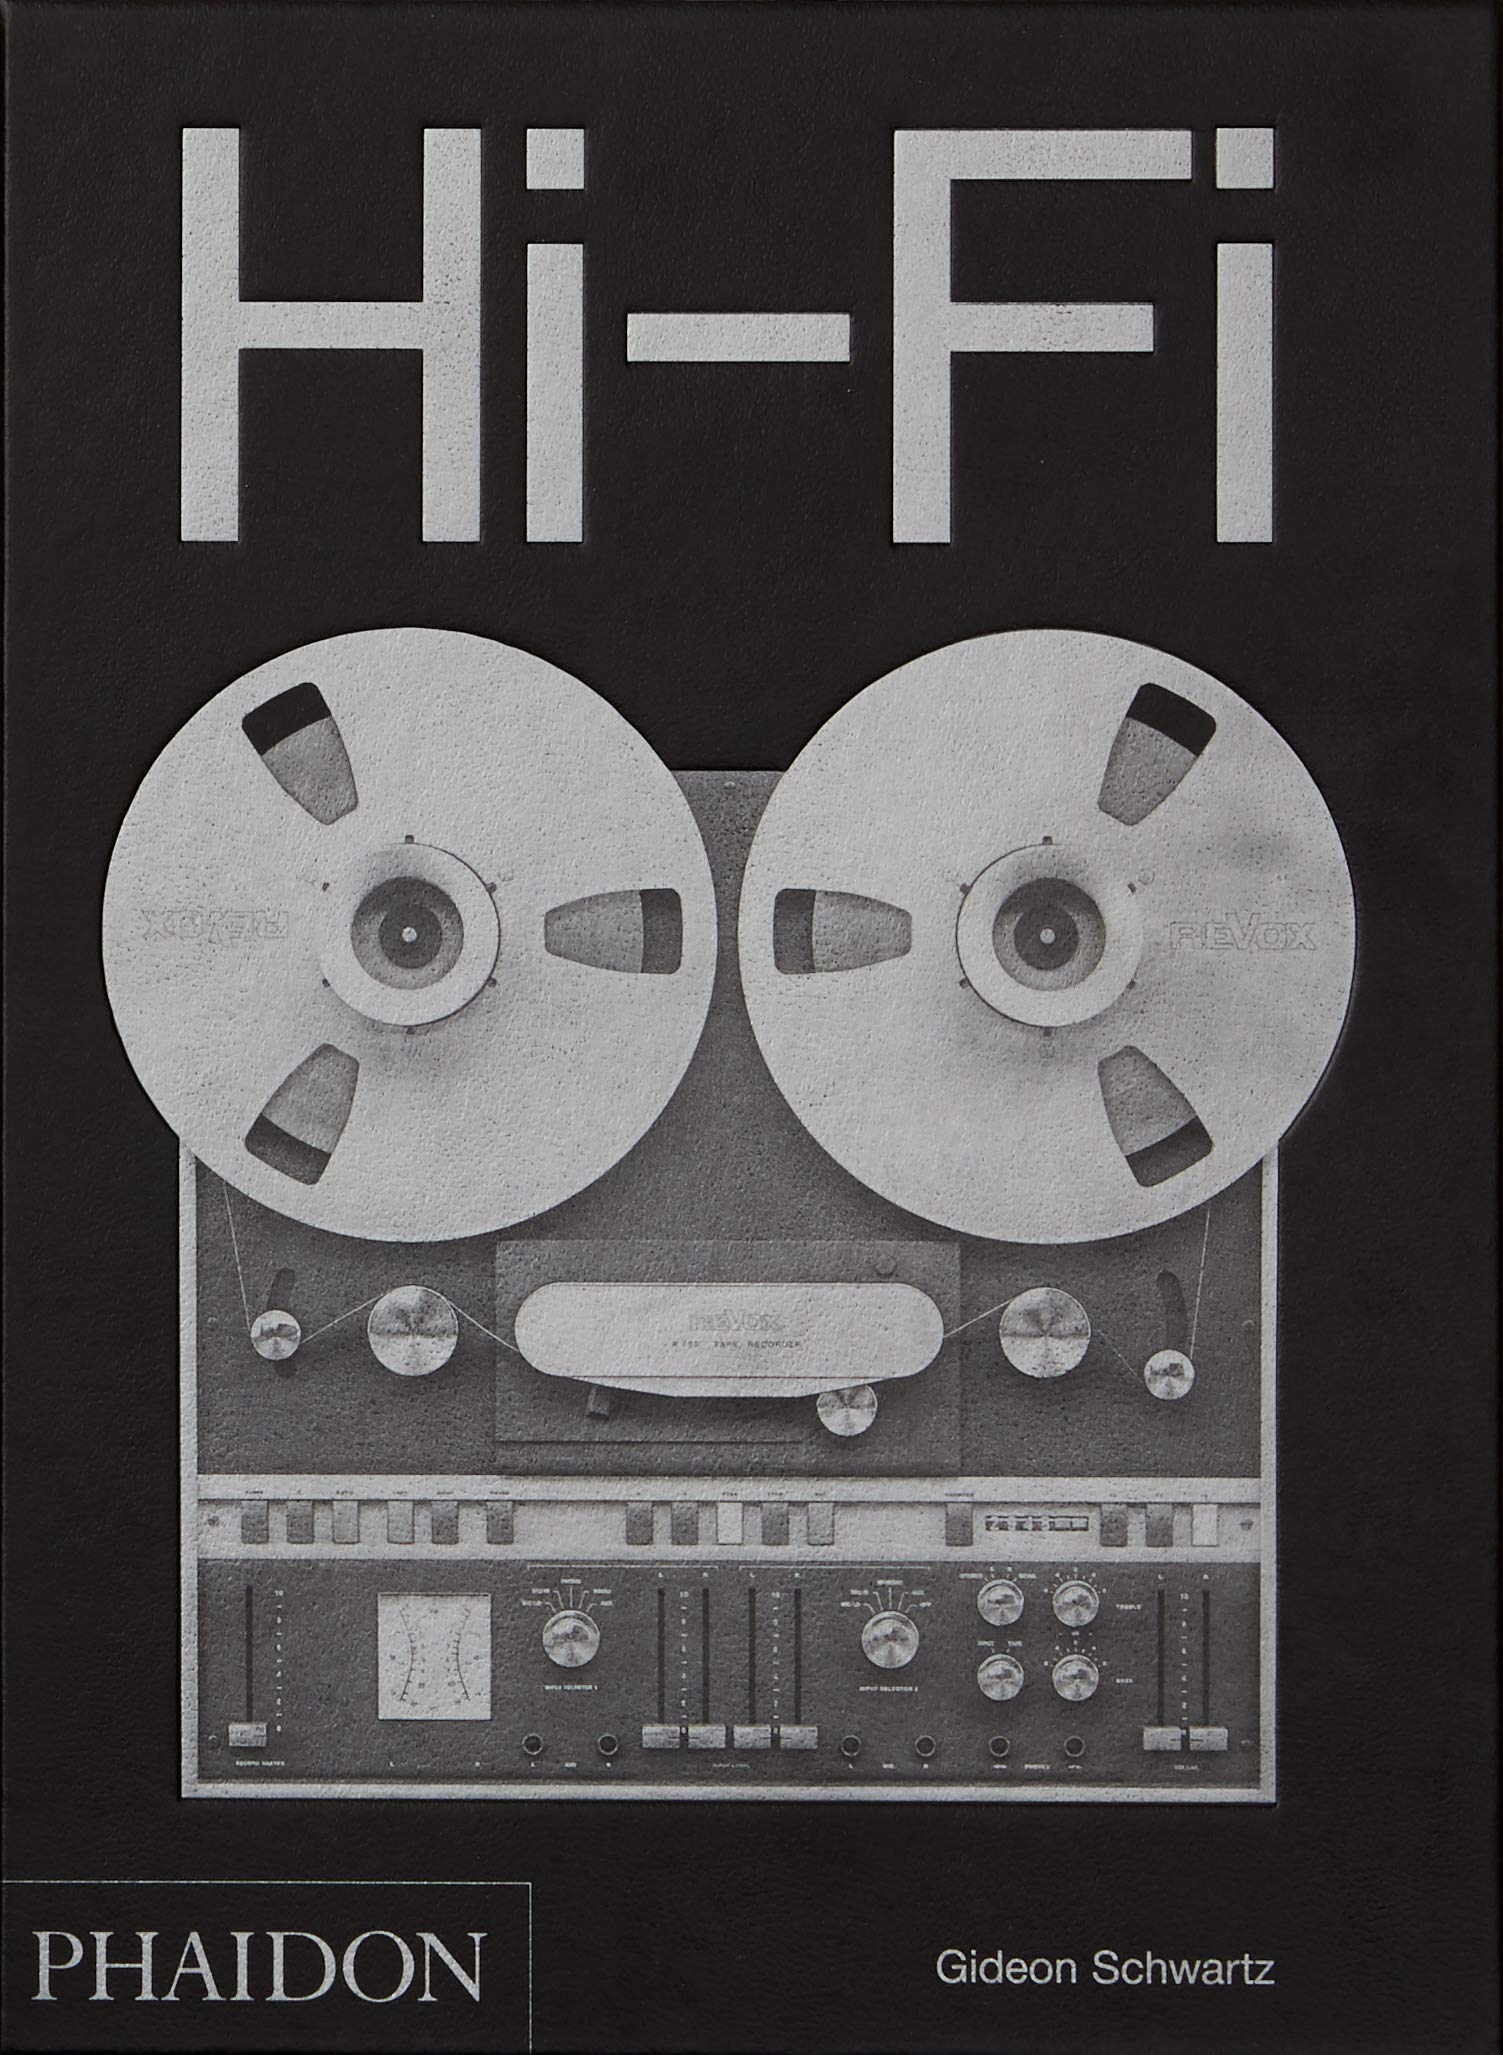 Hi-Fi: The History of High-End Audio Design: The History of High-End Audio Design